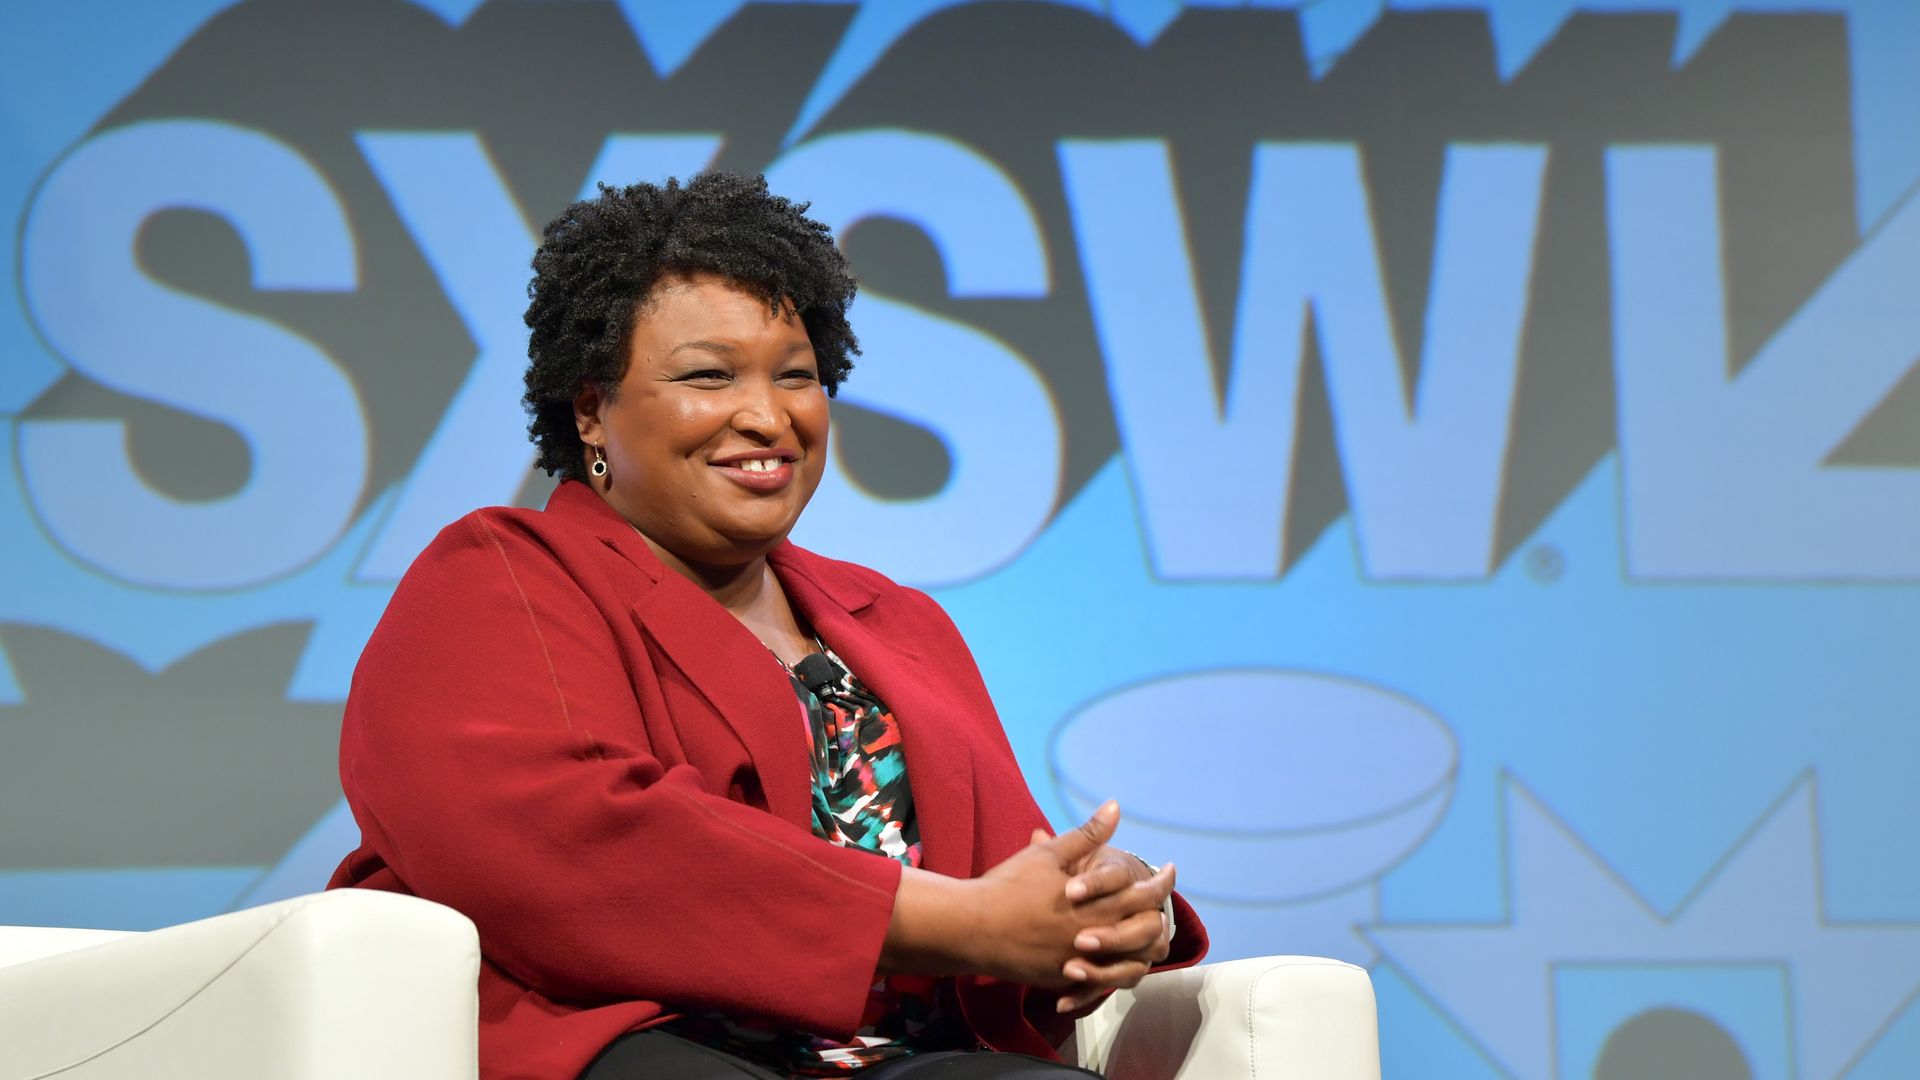 Stacey Abrams had long seen 2028 as the "earliest" she could see herself running for president.